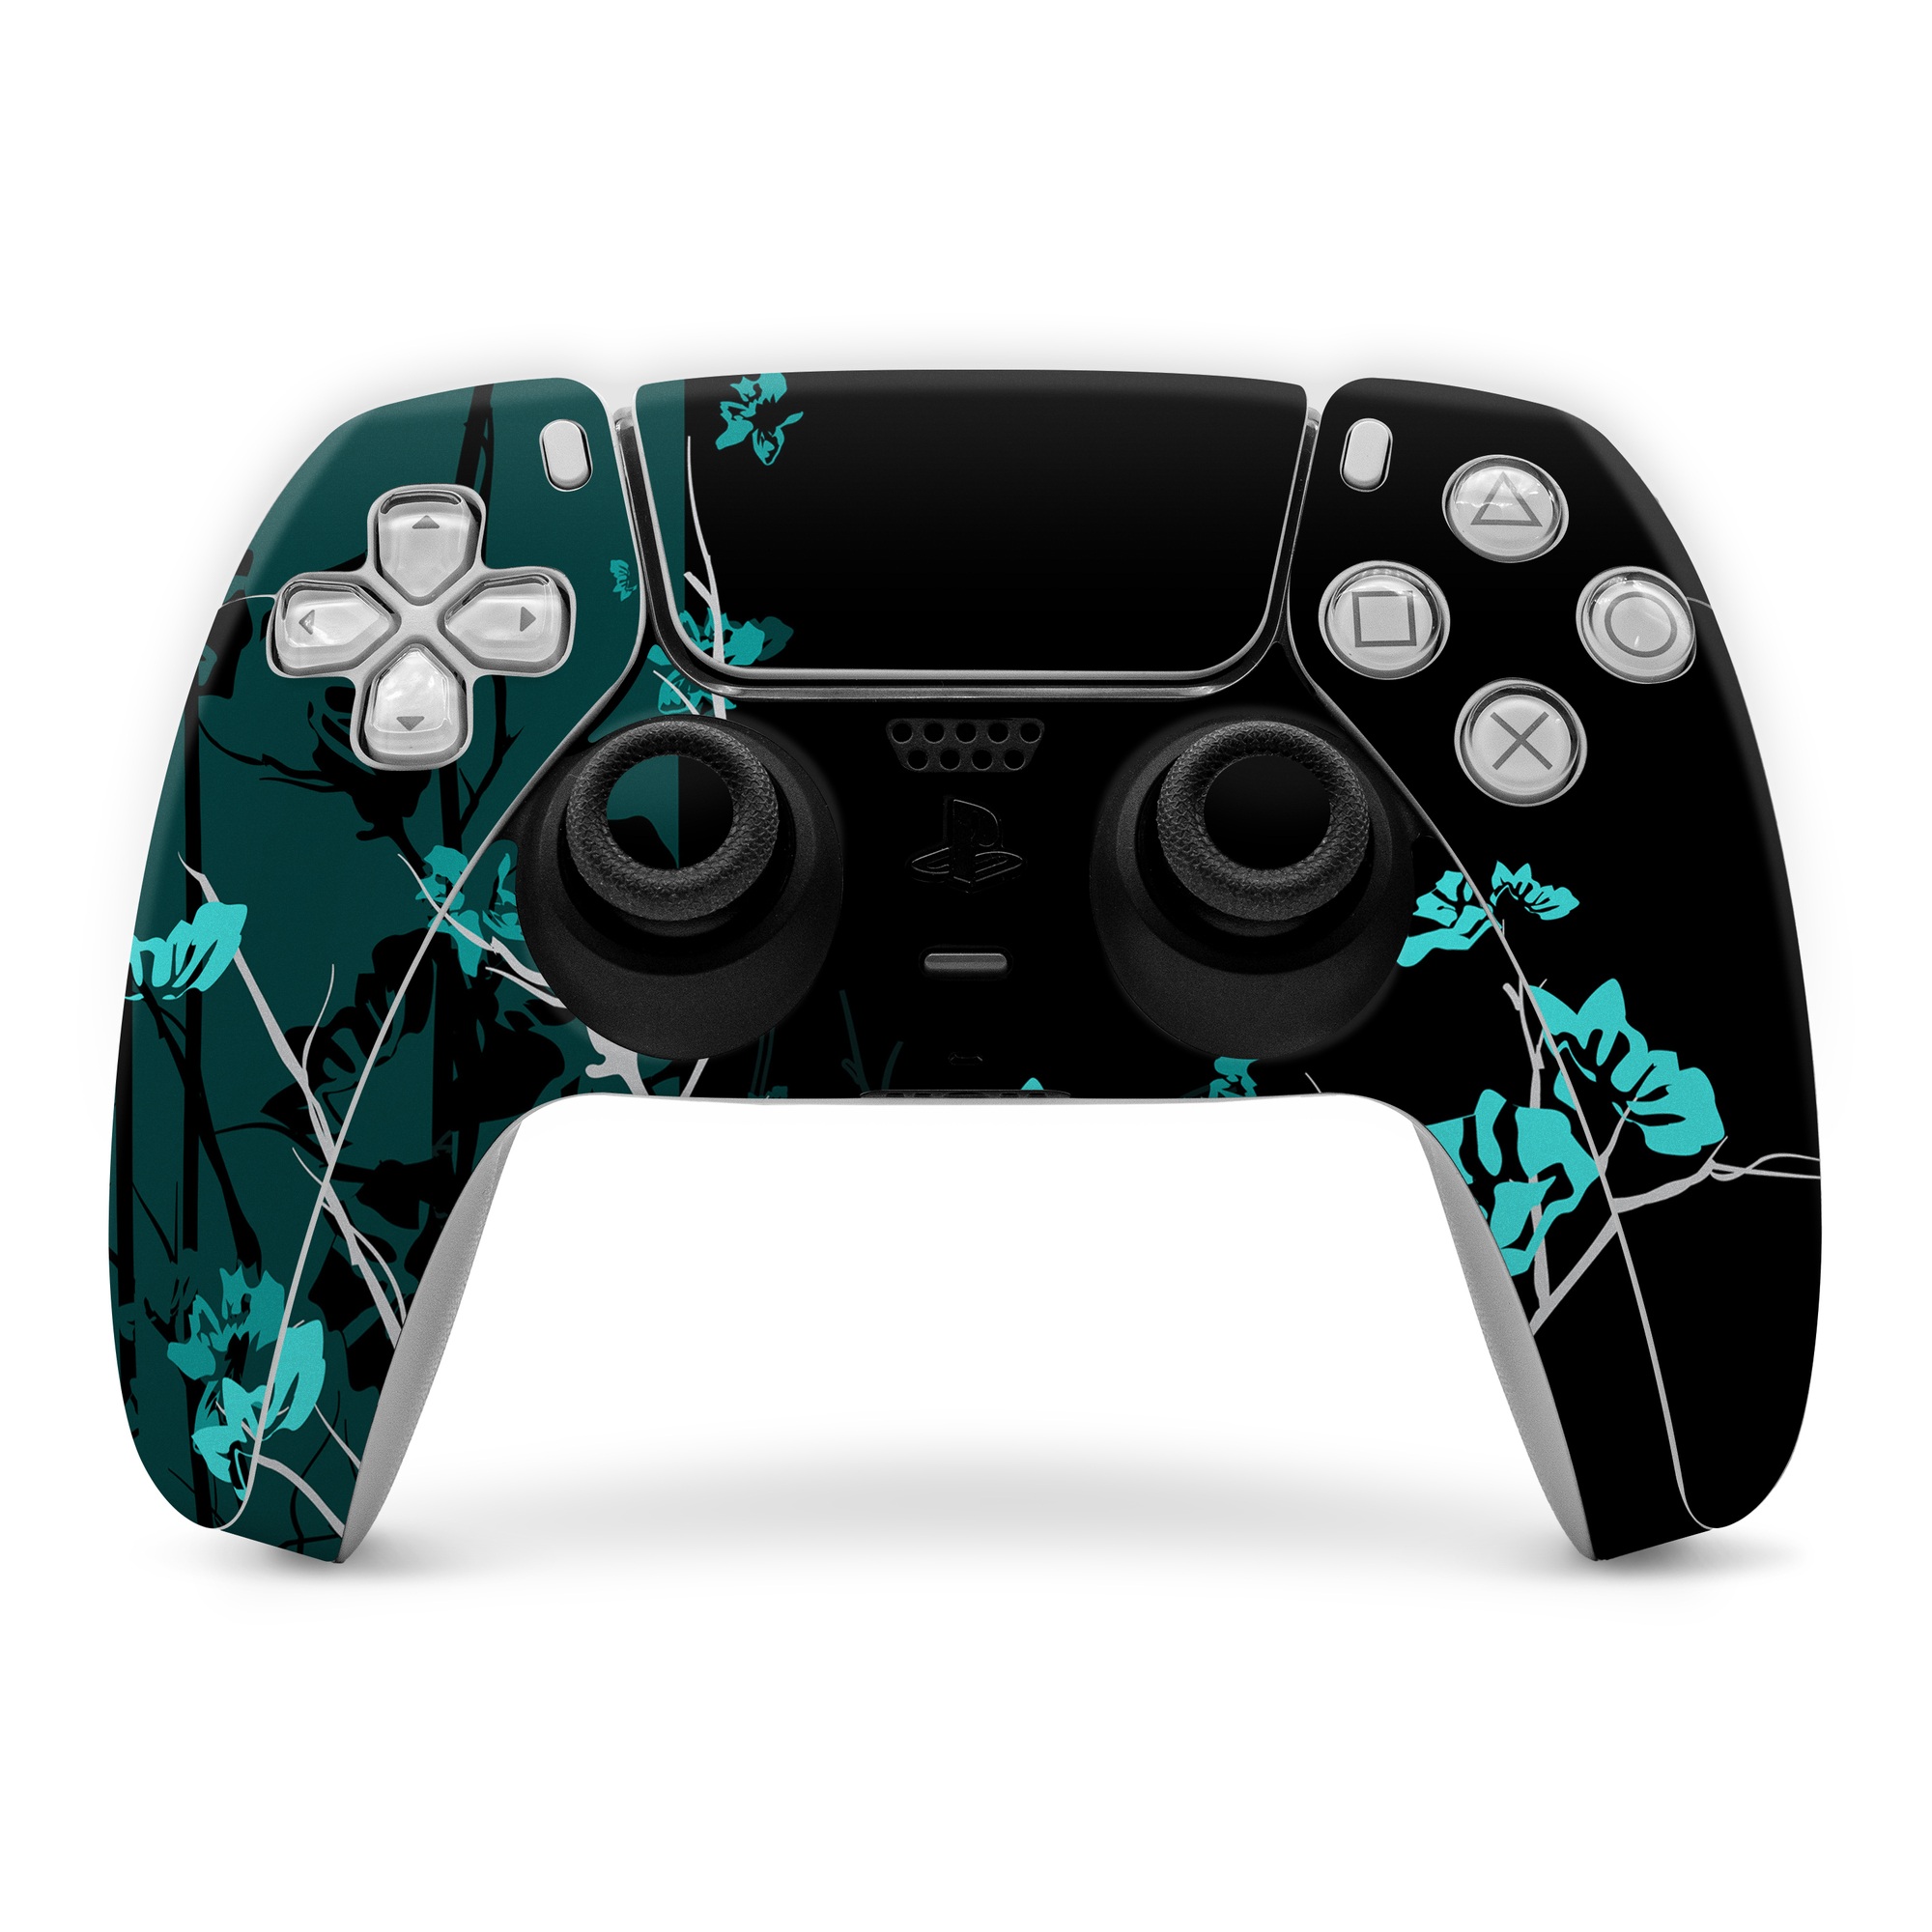 Sony PS5 Controller Skin - Aqua Tranquility (Image 1)